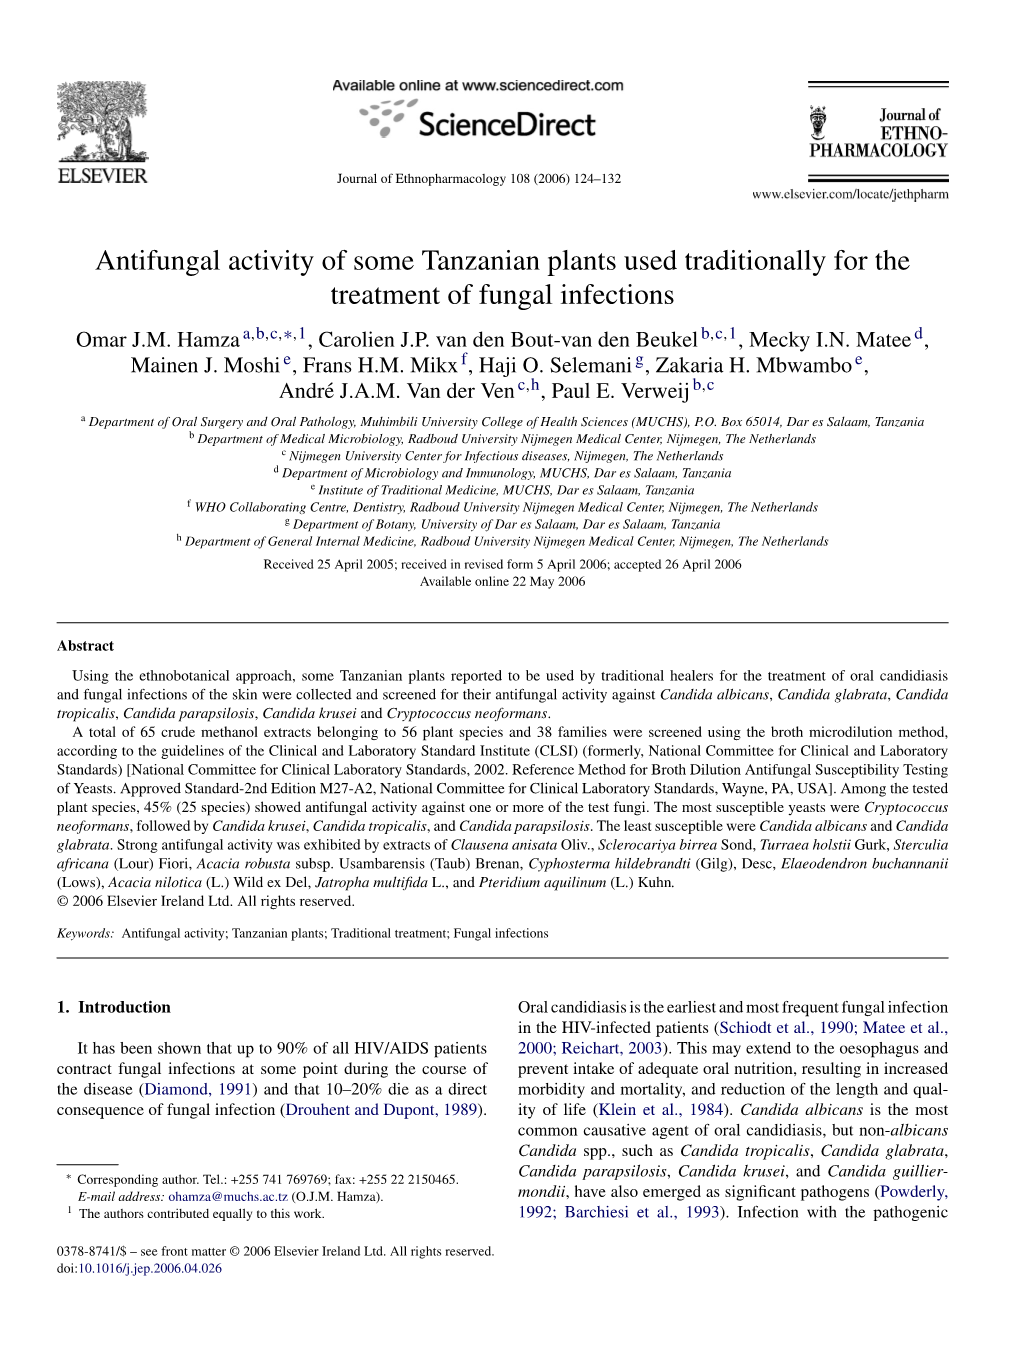 Antifungal Activity of Some Tanzanian Plants Used Traditionally for the Treatment of Fungal Infections Omar J.M